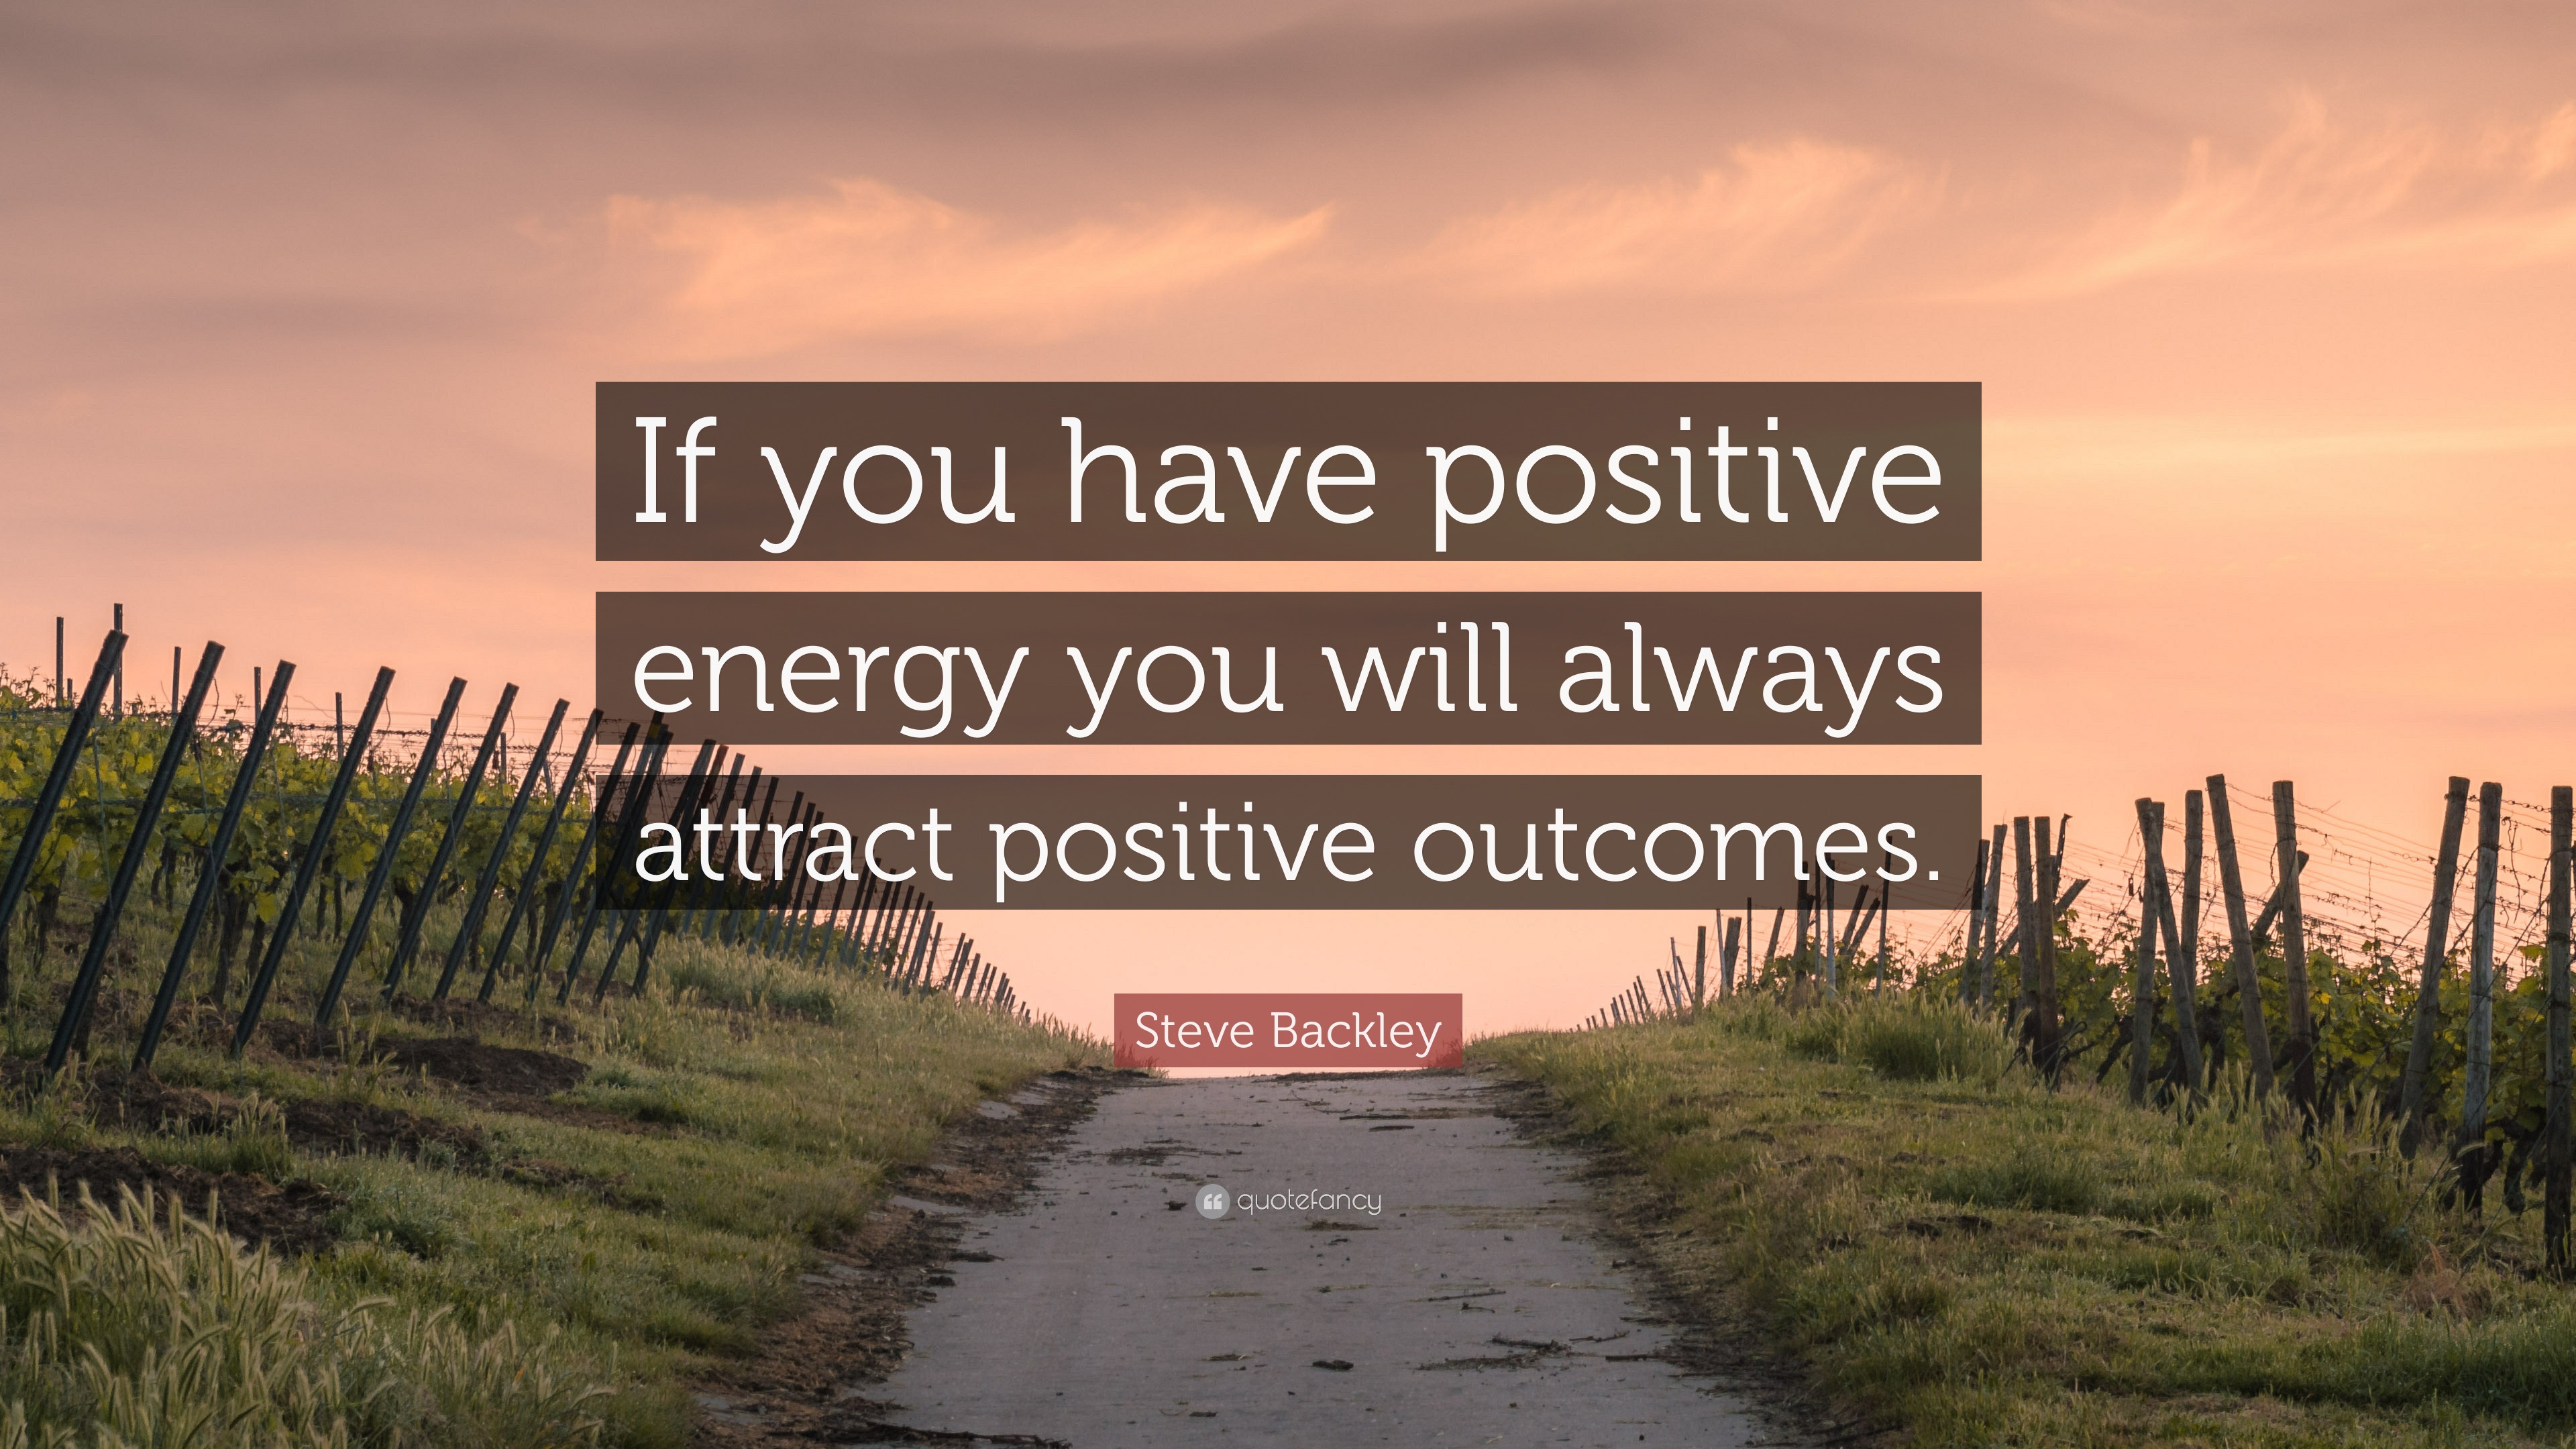 Steve Backley Quote “If you have positive energy you will